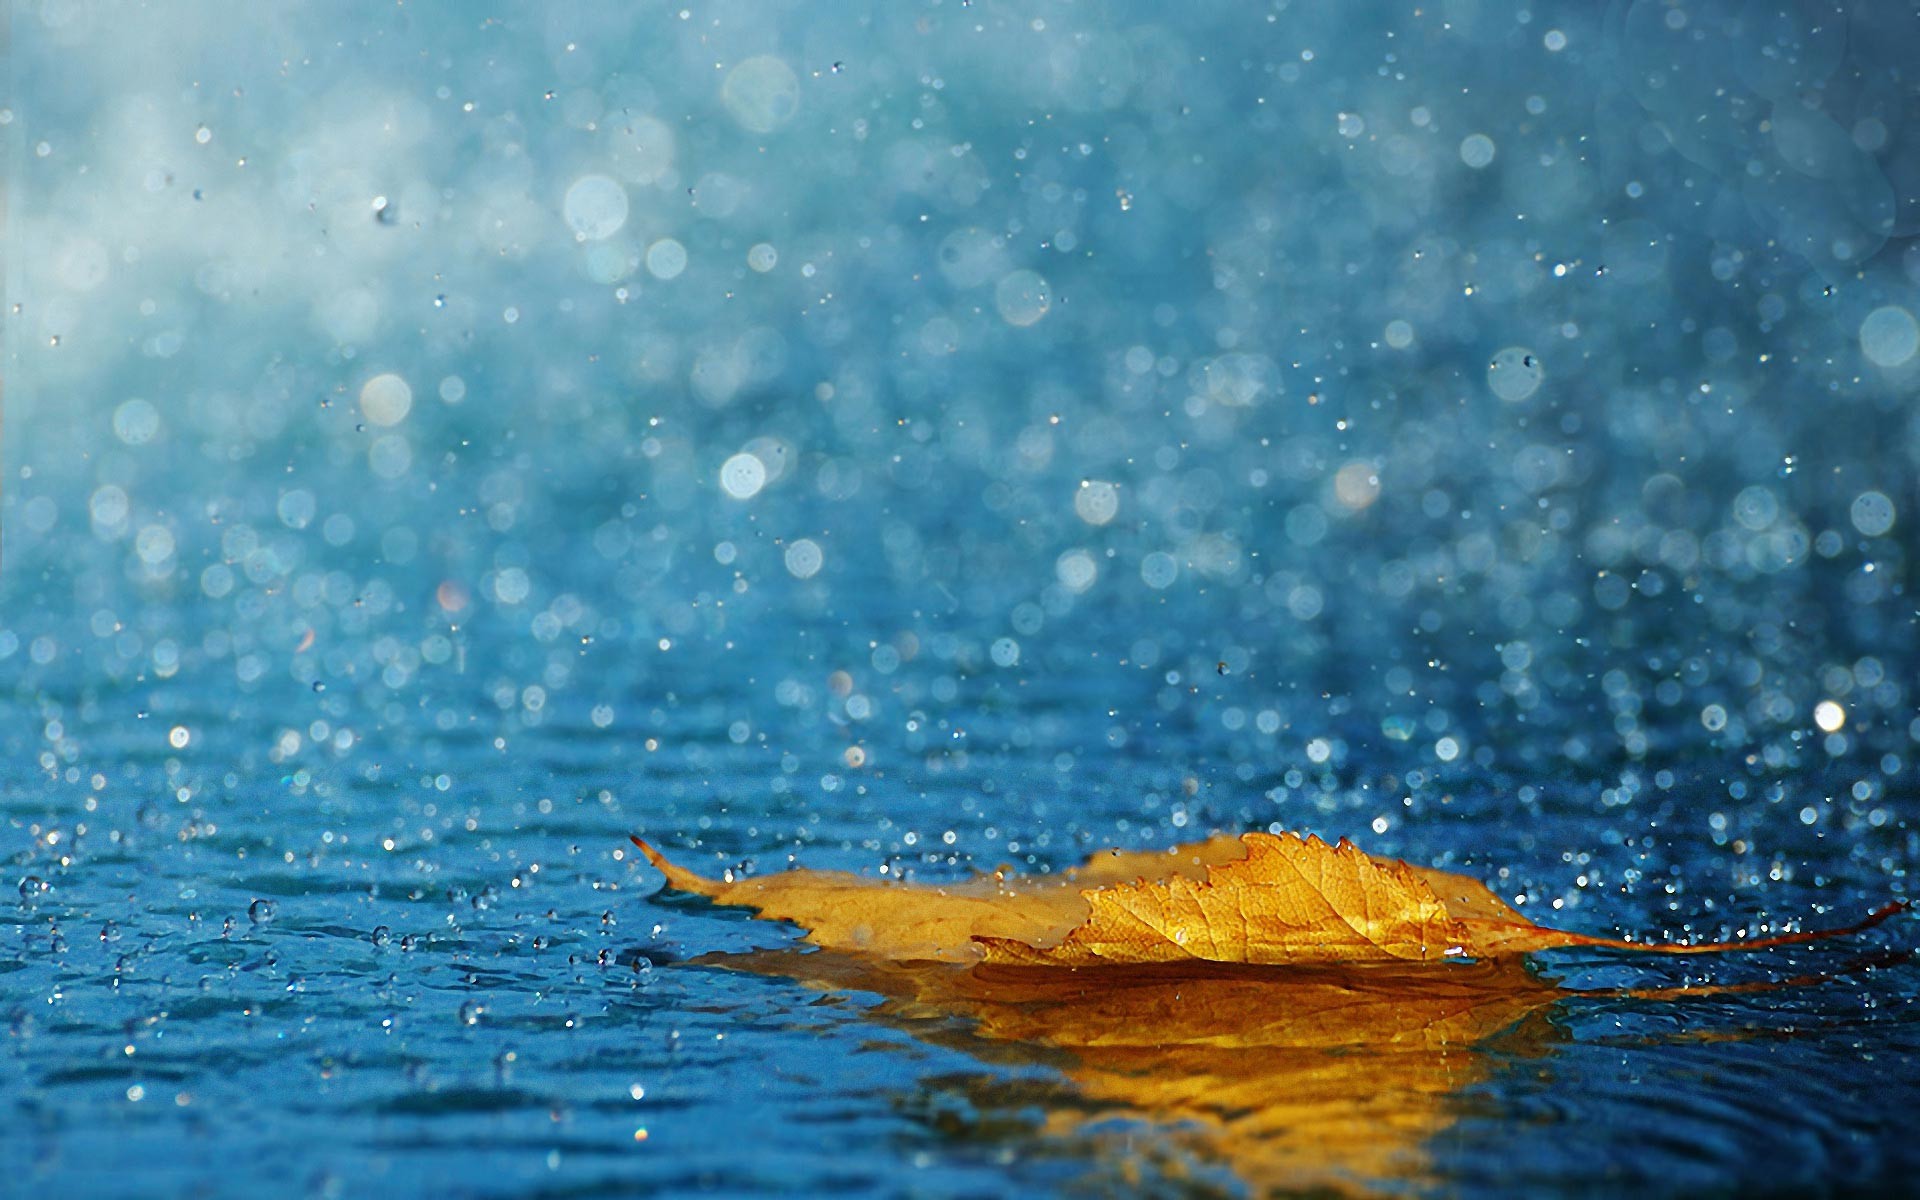 1920x1200 Rain Wallpapers Background For Desktop Wallpaper 1920 x 1200 px 692.31 KB  animated season drops quotes